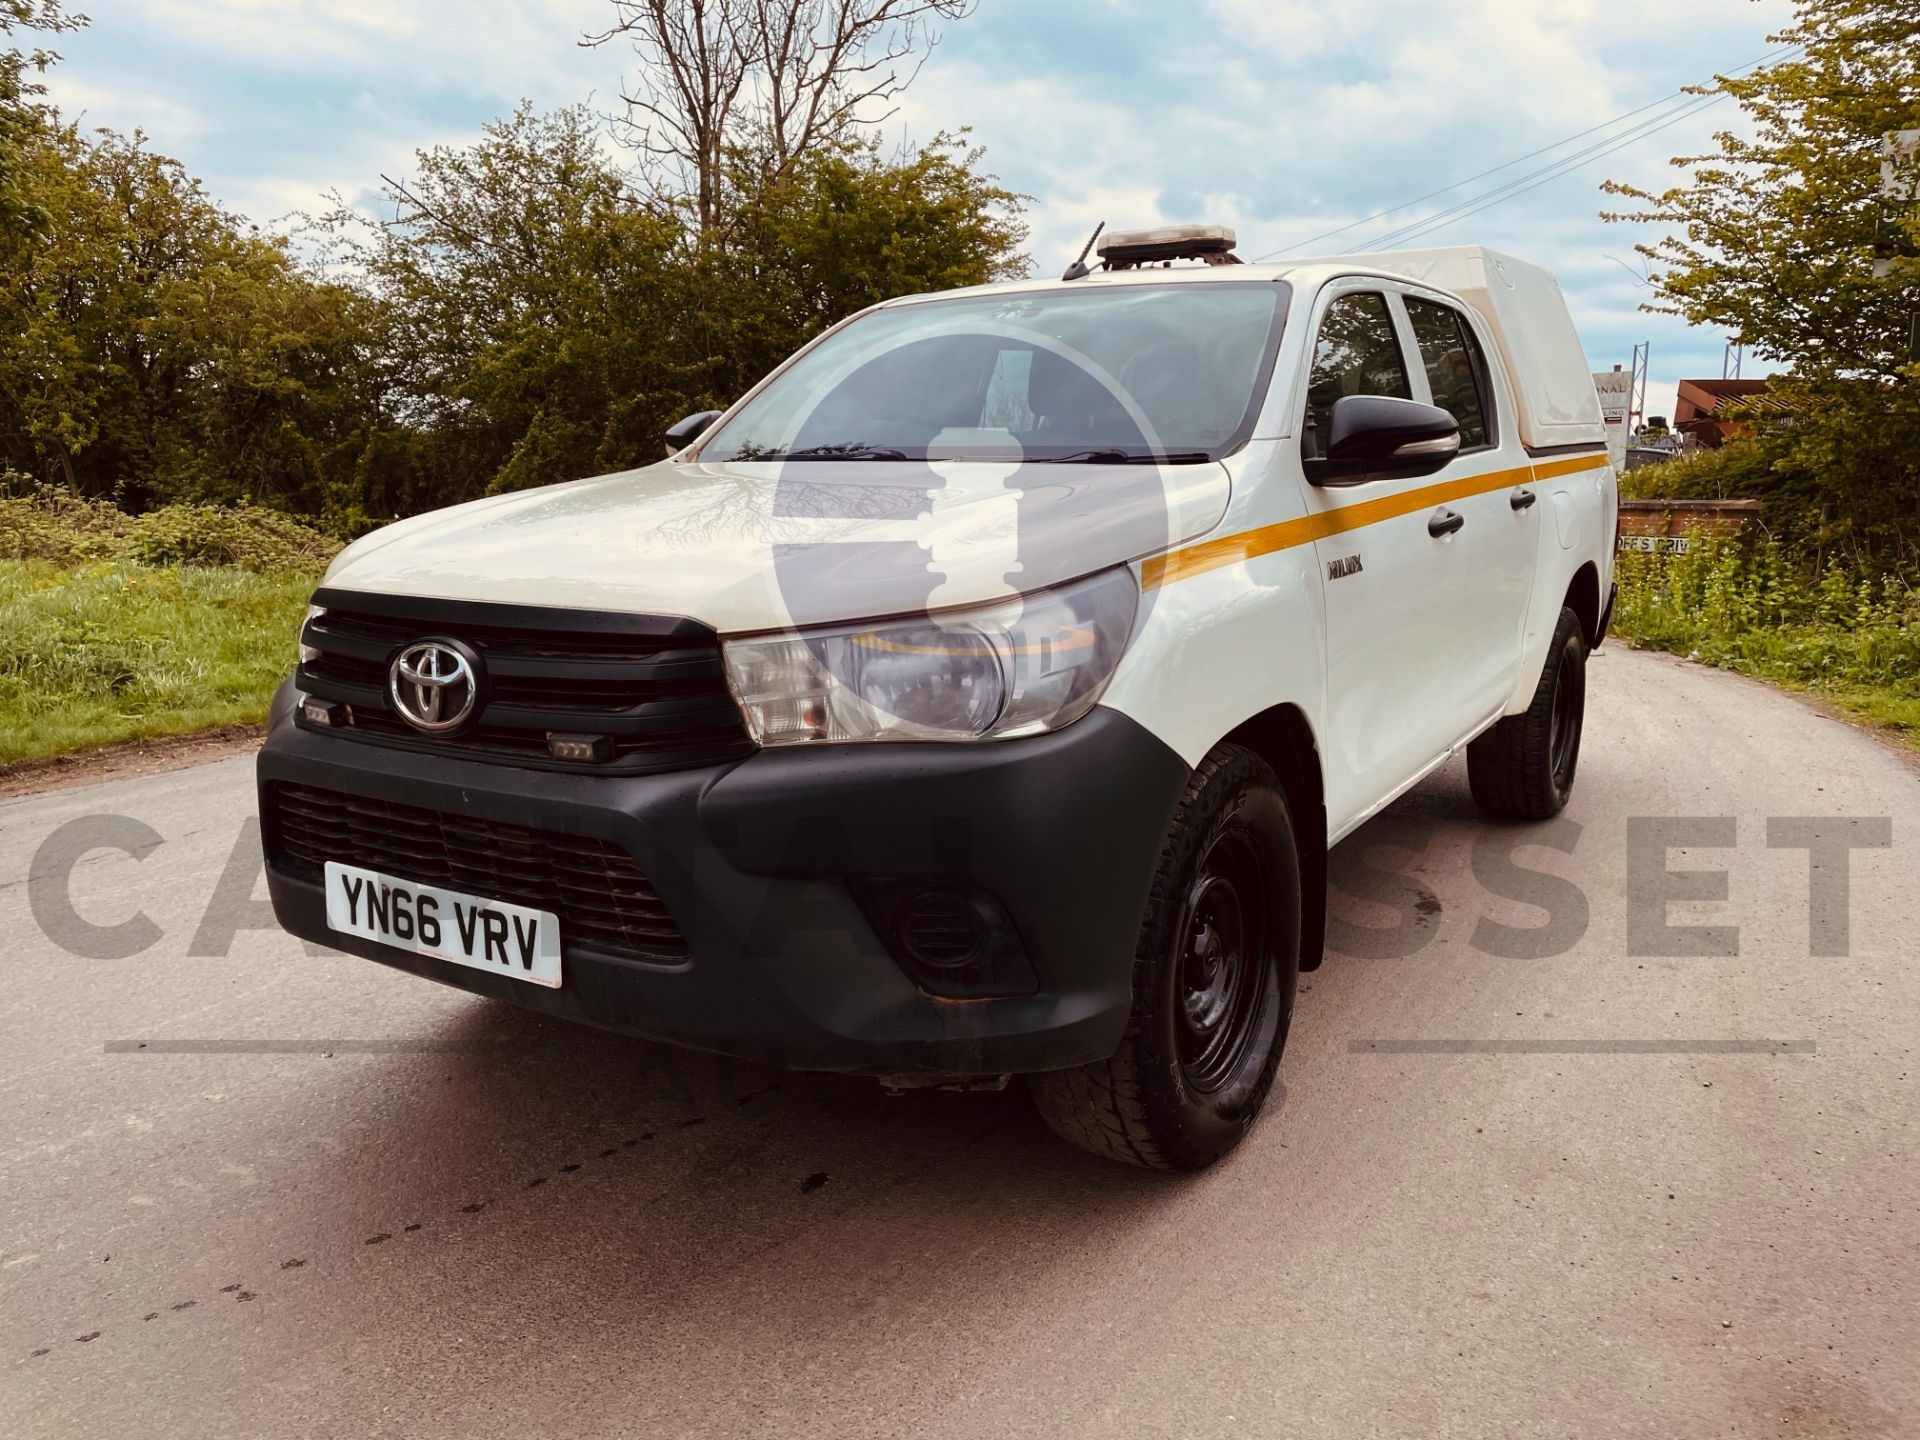 (ON SALE) TOYOTA HILUX *ACTIVE EDITION* DOUBLE CAB PICK-UP (2017 - EURO 6) D-4D - AUTO STOP/START - Image 4 of 25